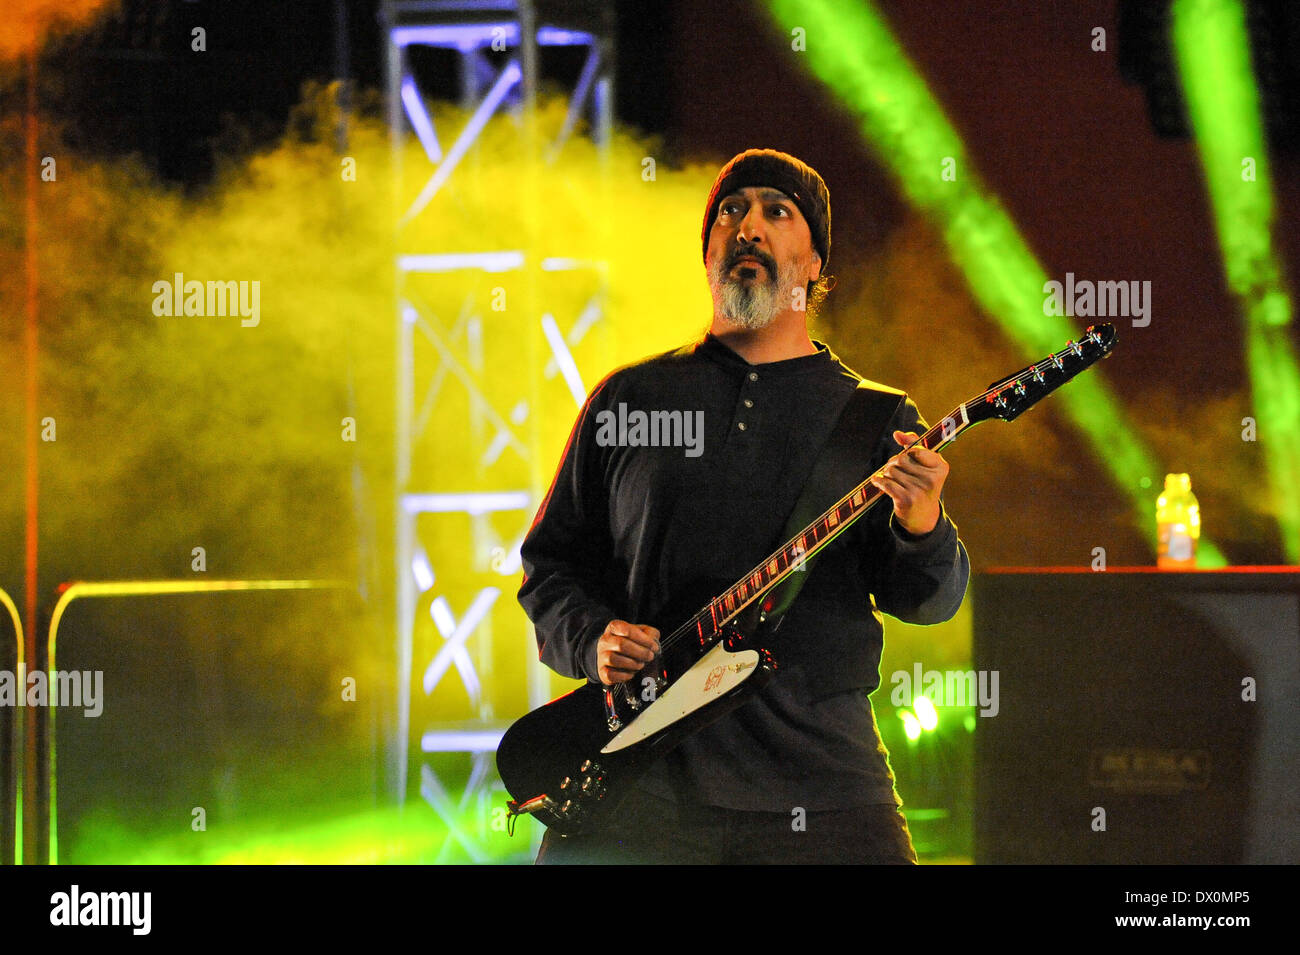 Austin, Texas, USA. 14th Mar, 2014. Kim Thayil of Soundgarden performs in concert at the Guitar Center Direct TV live stream show from a roof top party during South By Southwest (SXSW) on March 14, 2014 in Austin, Texas - USA (Photo by Manuel Nauta/NurPhoto) Credit:  Manuel Nauta/NurPhoto/ZUMAPRESS.com/Alamy Live News Stock Photo